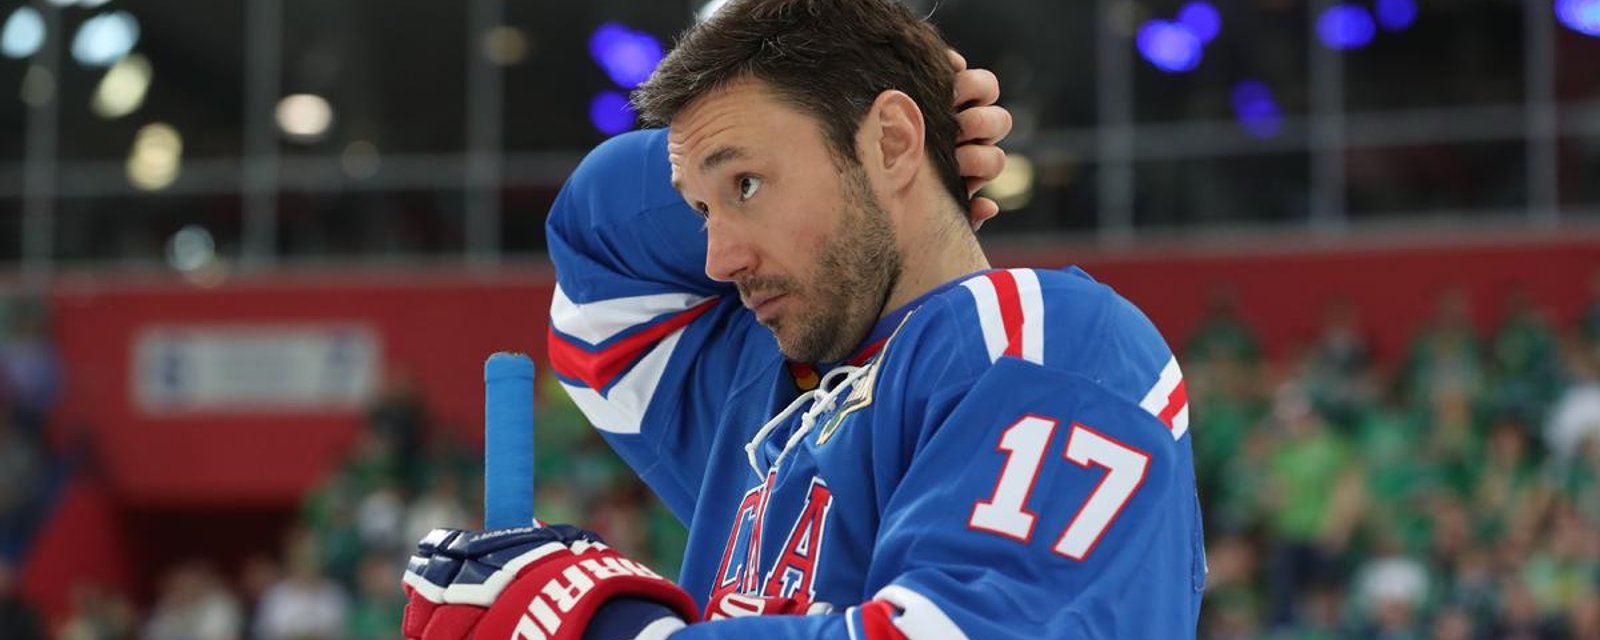 Frustrating facts uncovered about Ilya Kovalchuk's past months. 